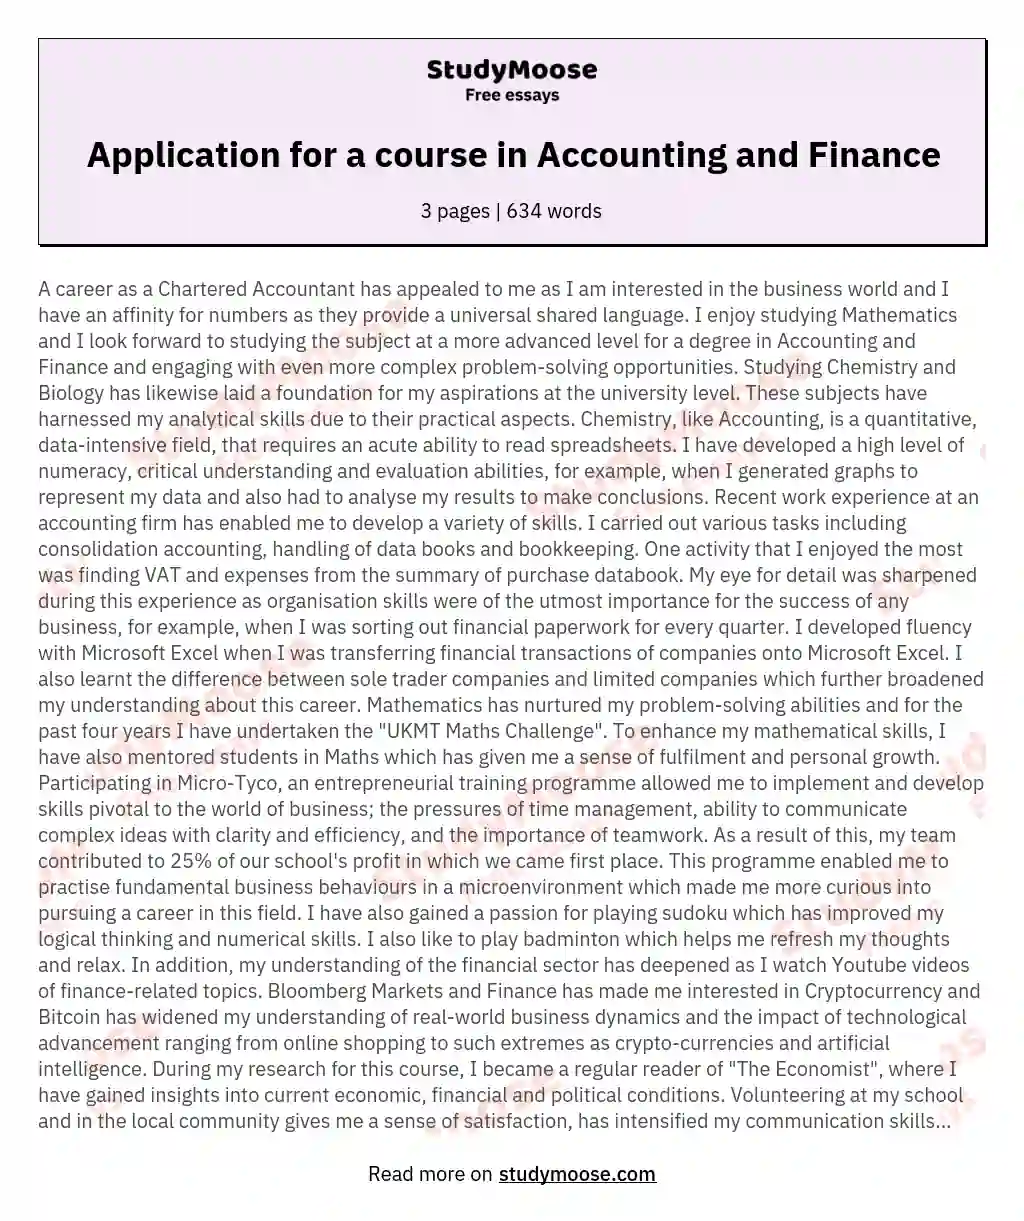 Application for a course in Accounting and Finance essay